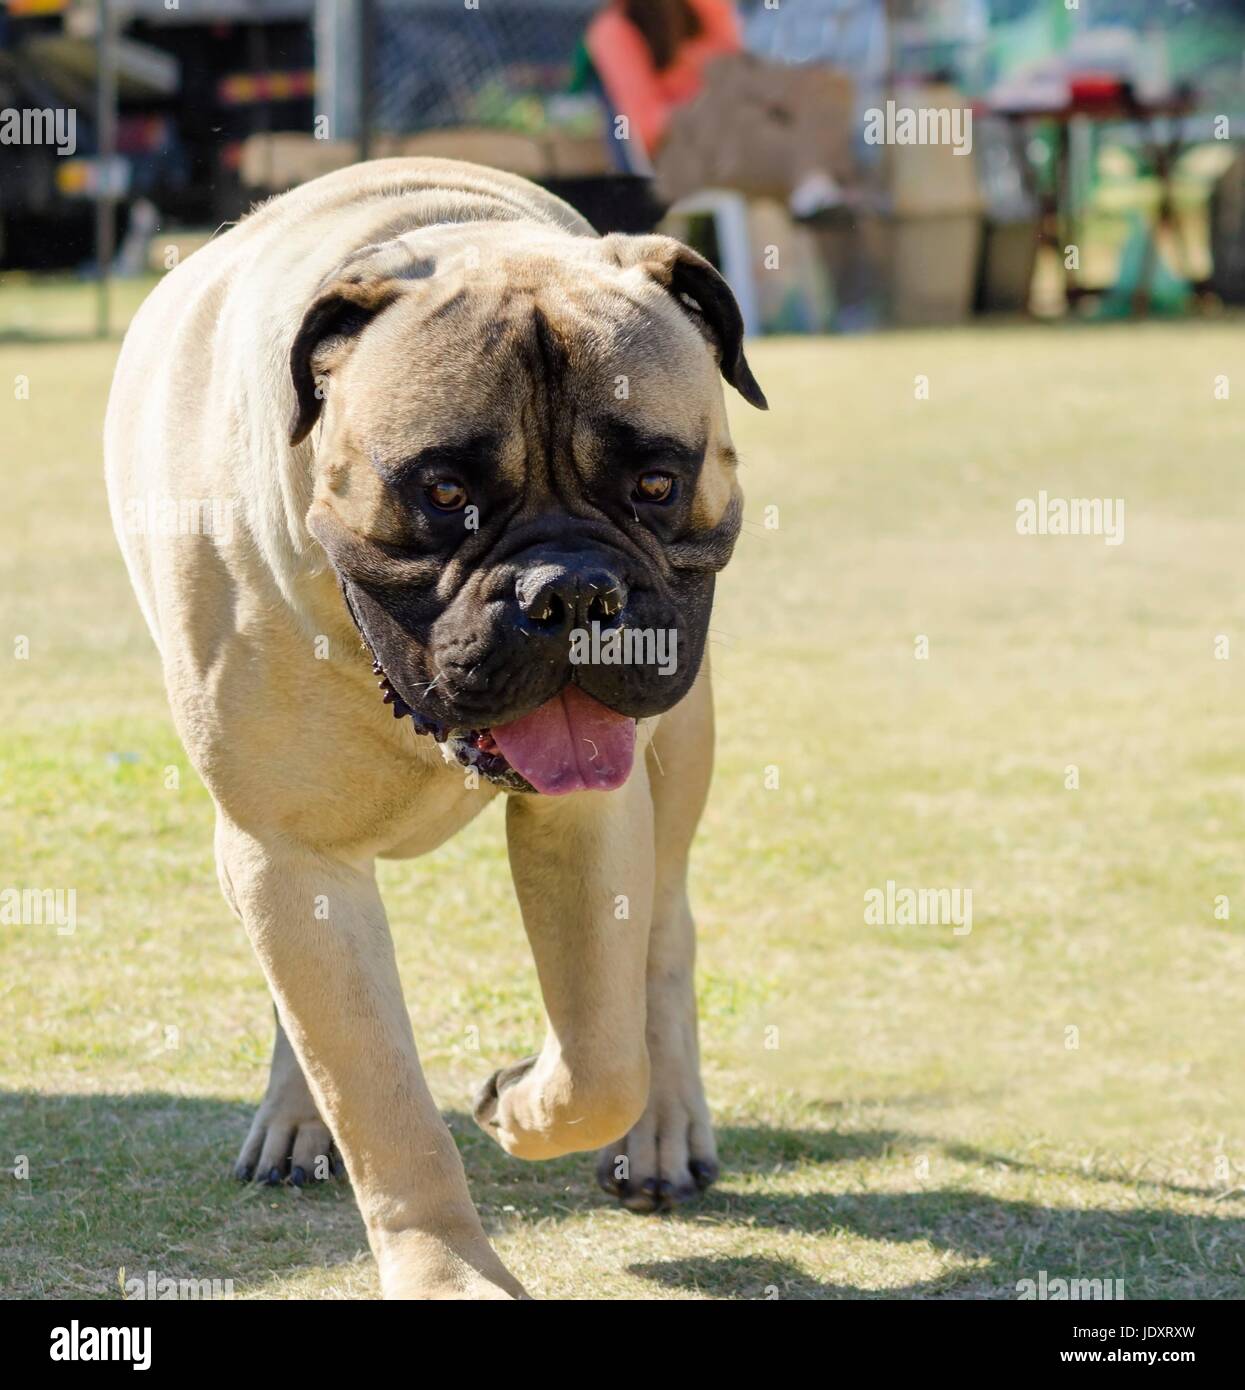 A portrait view of a young, beautiful red fawn, medium sized Bullmastiff dog walking on the grass. The Bullmastiff is a powerfully built animal with great intelligence and a willingness to please. Stock Photo